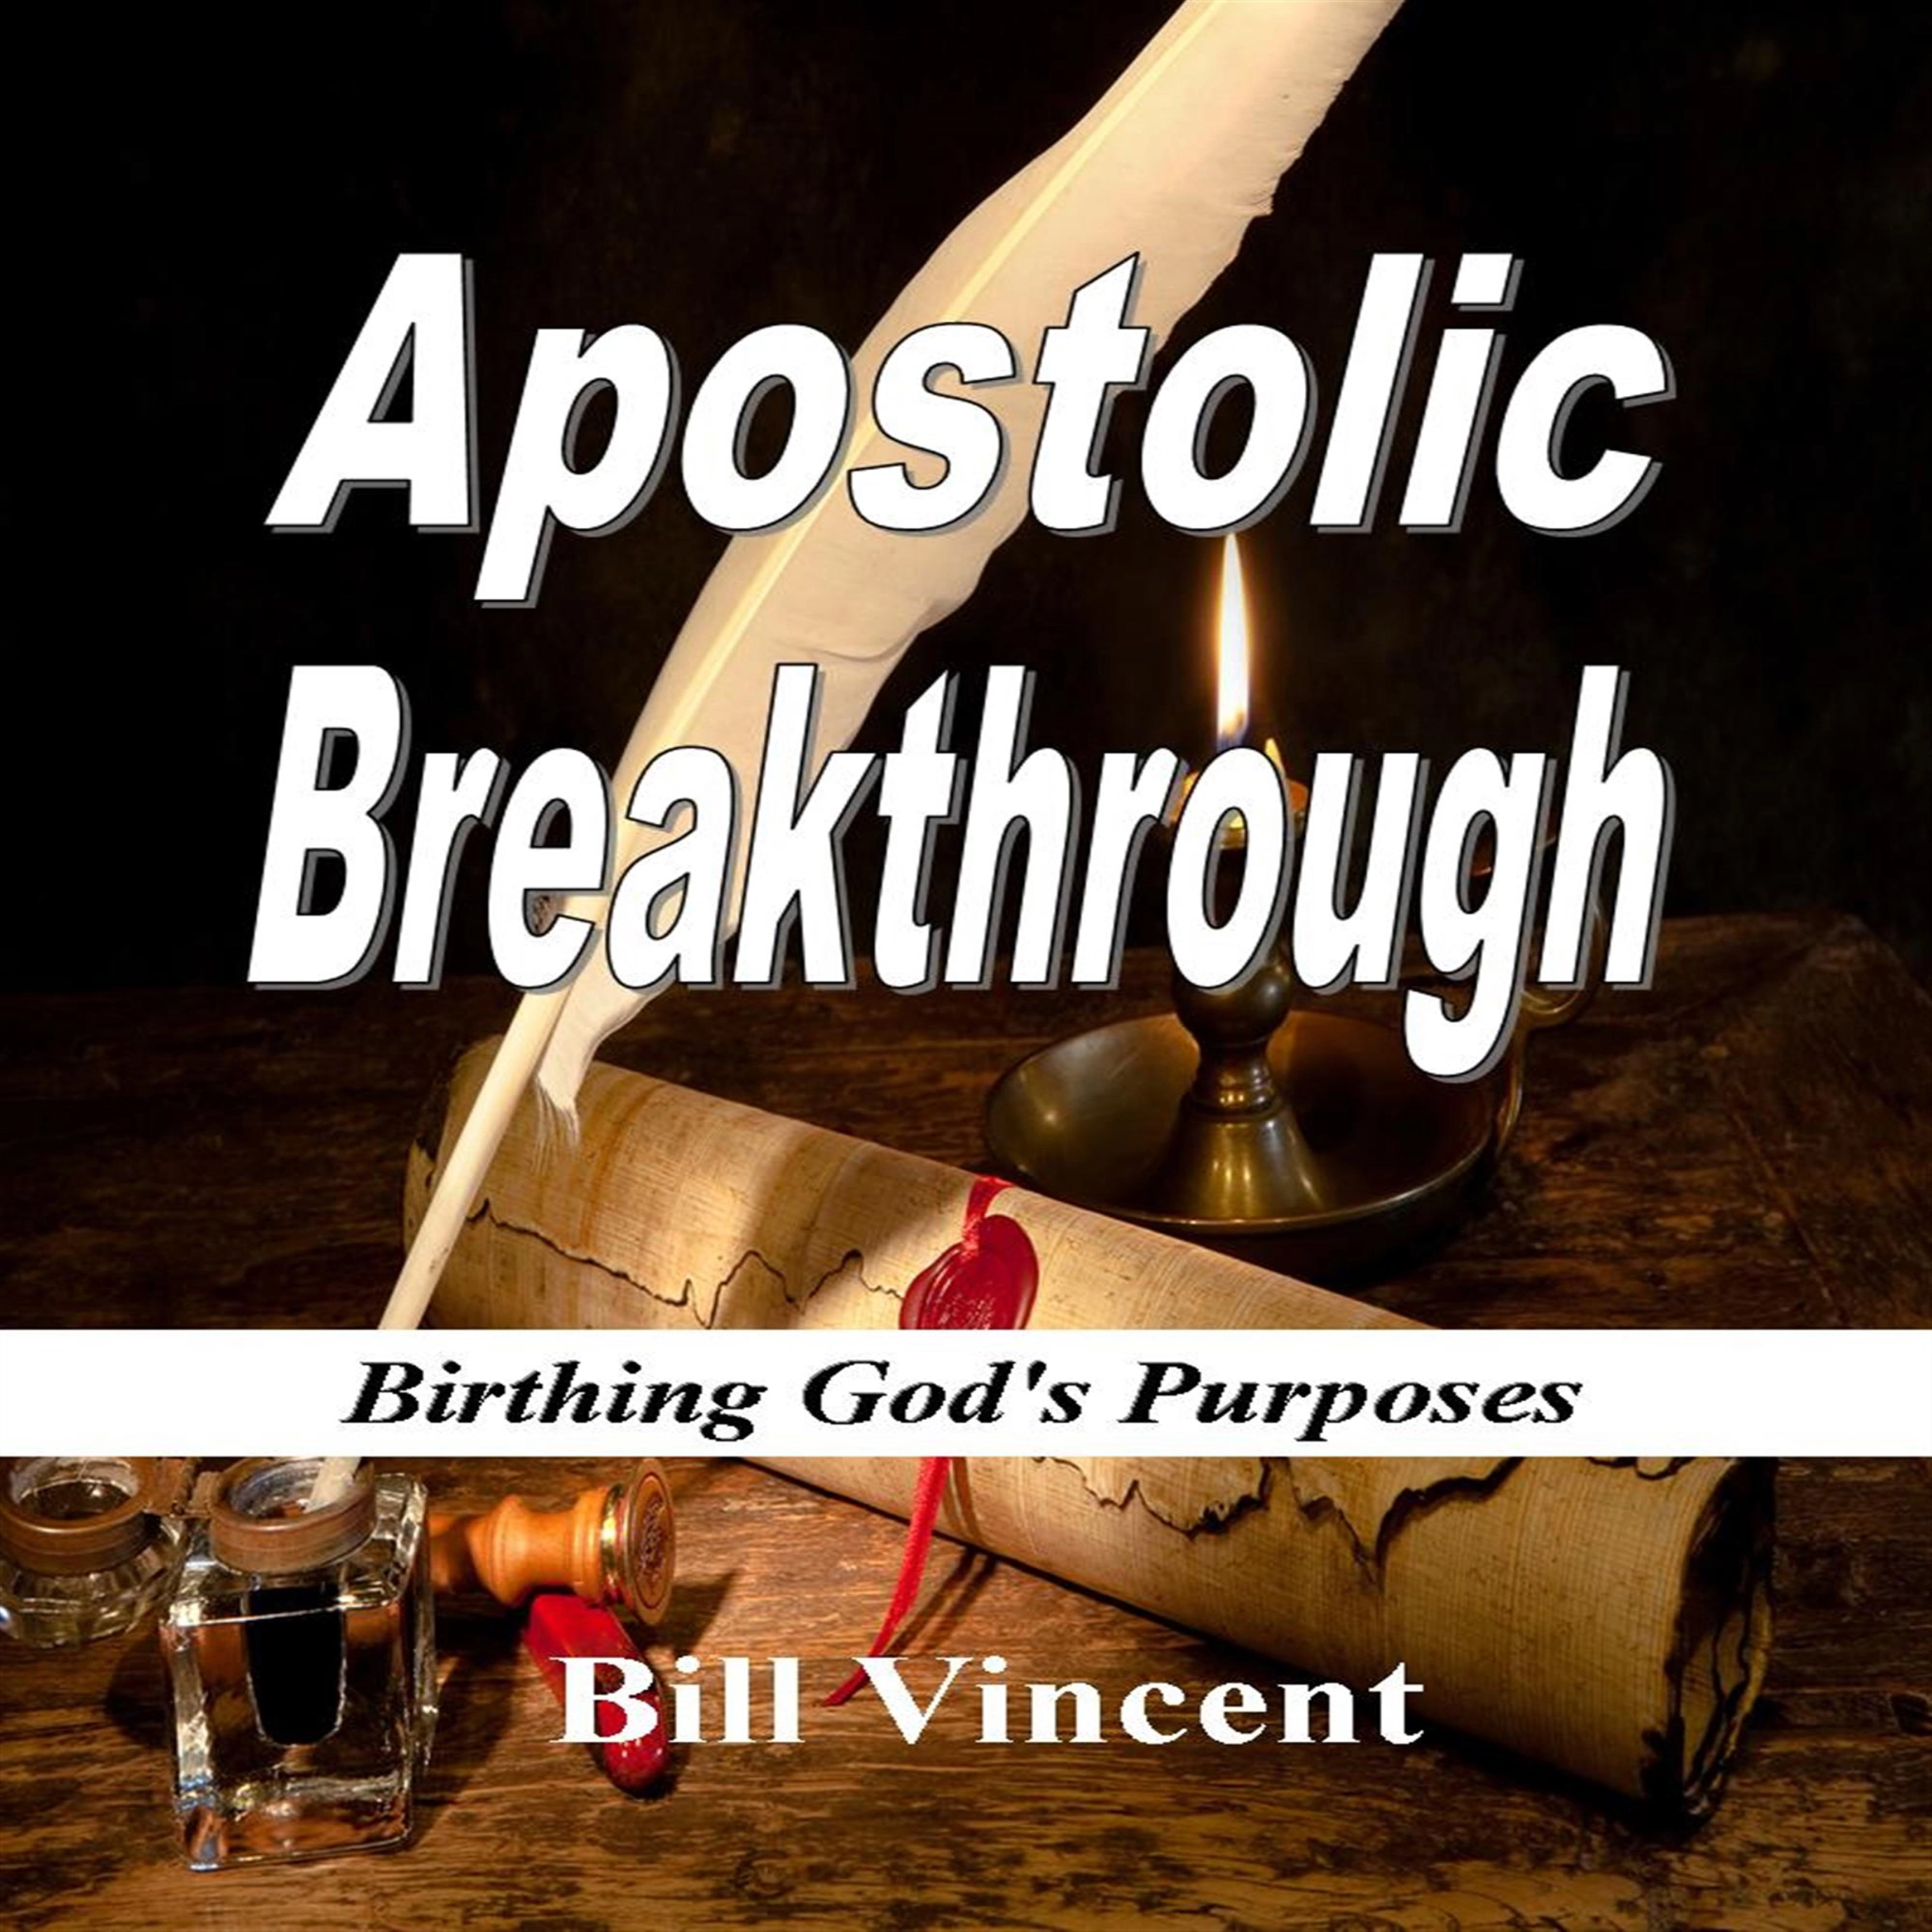 Apostolic Breakthrough by Bill Vincent Audiobook